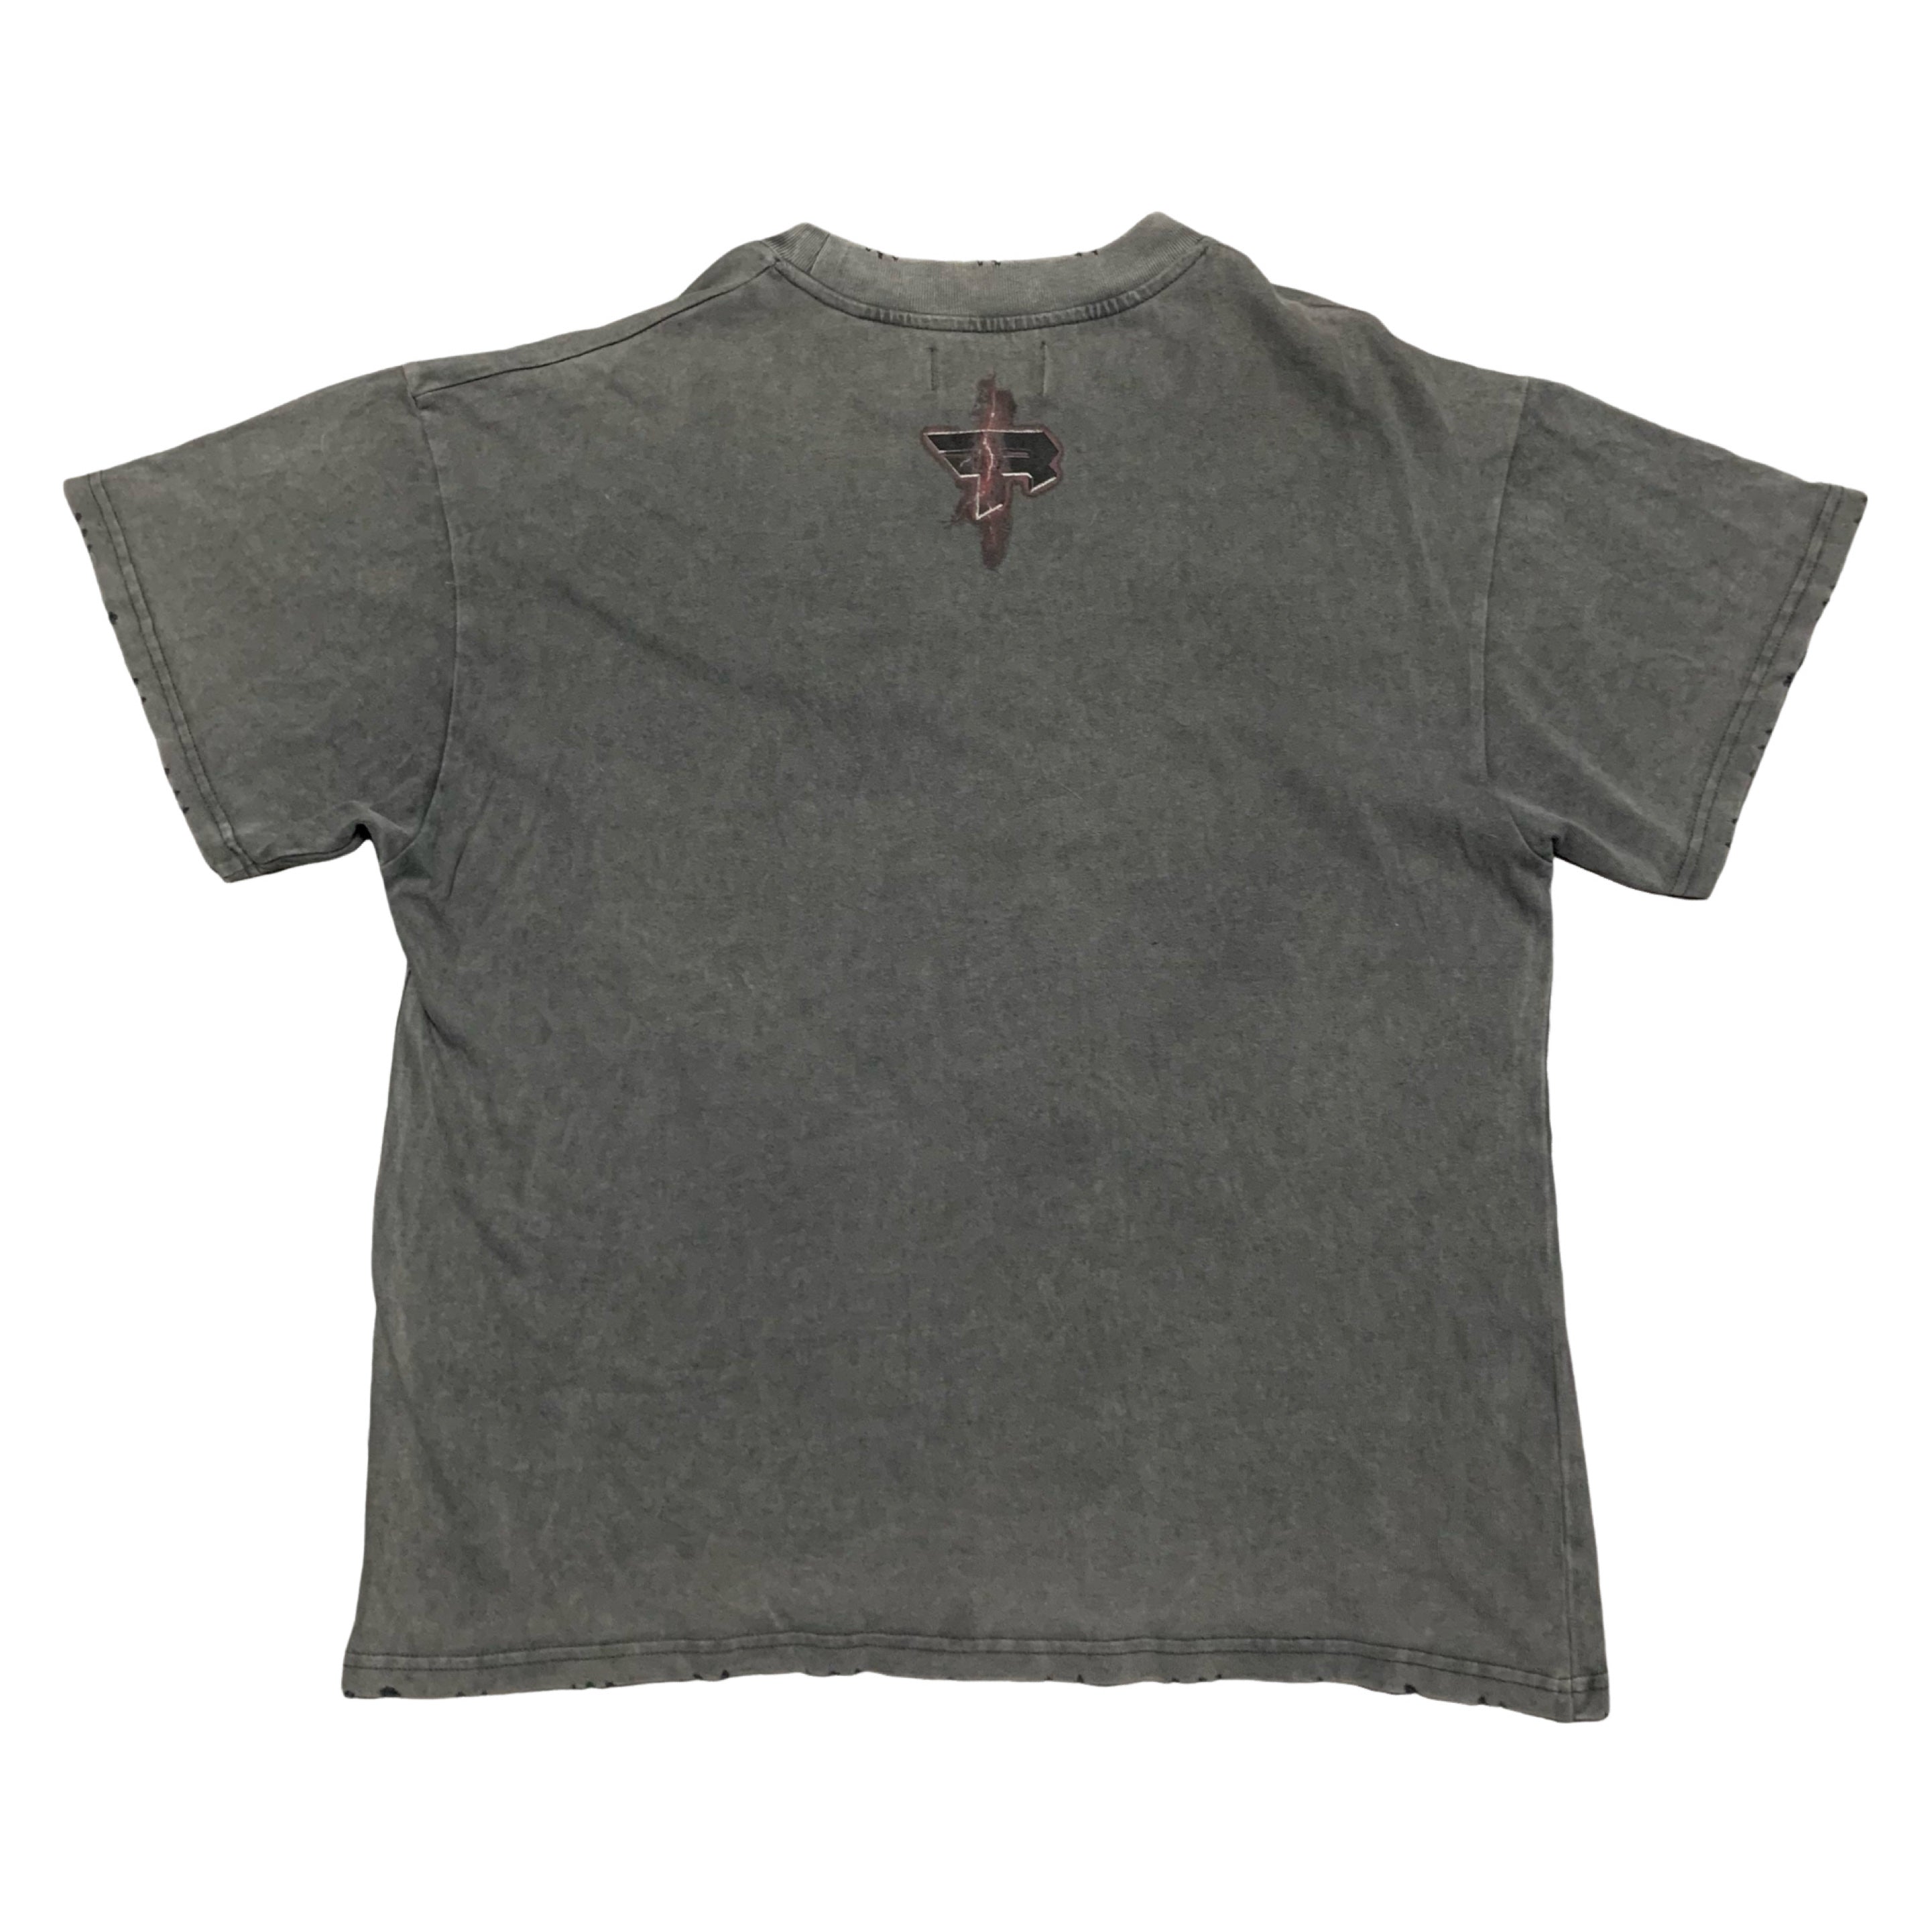 Represent Large Faze Clan Vintage Grey Tee Limited Edition